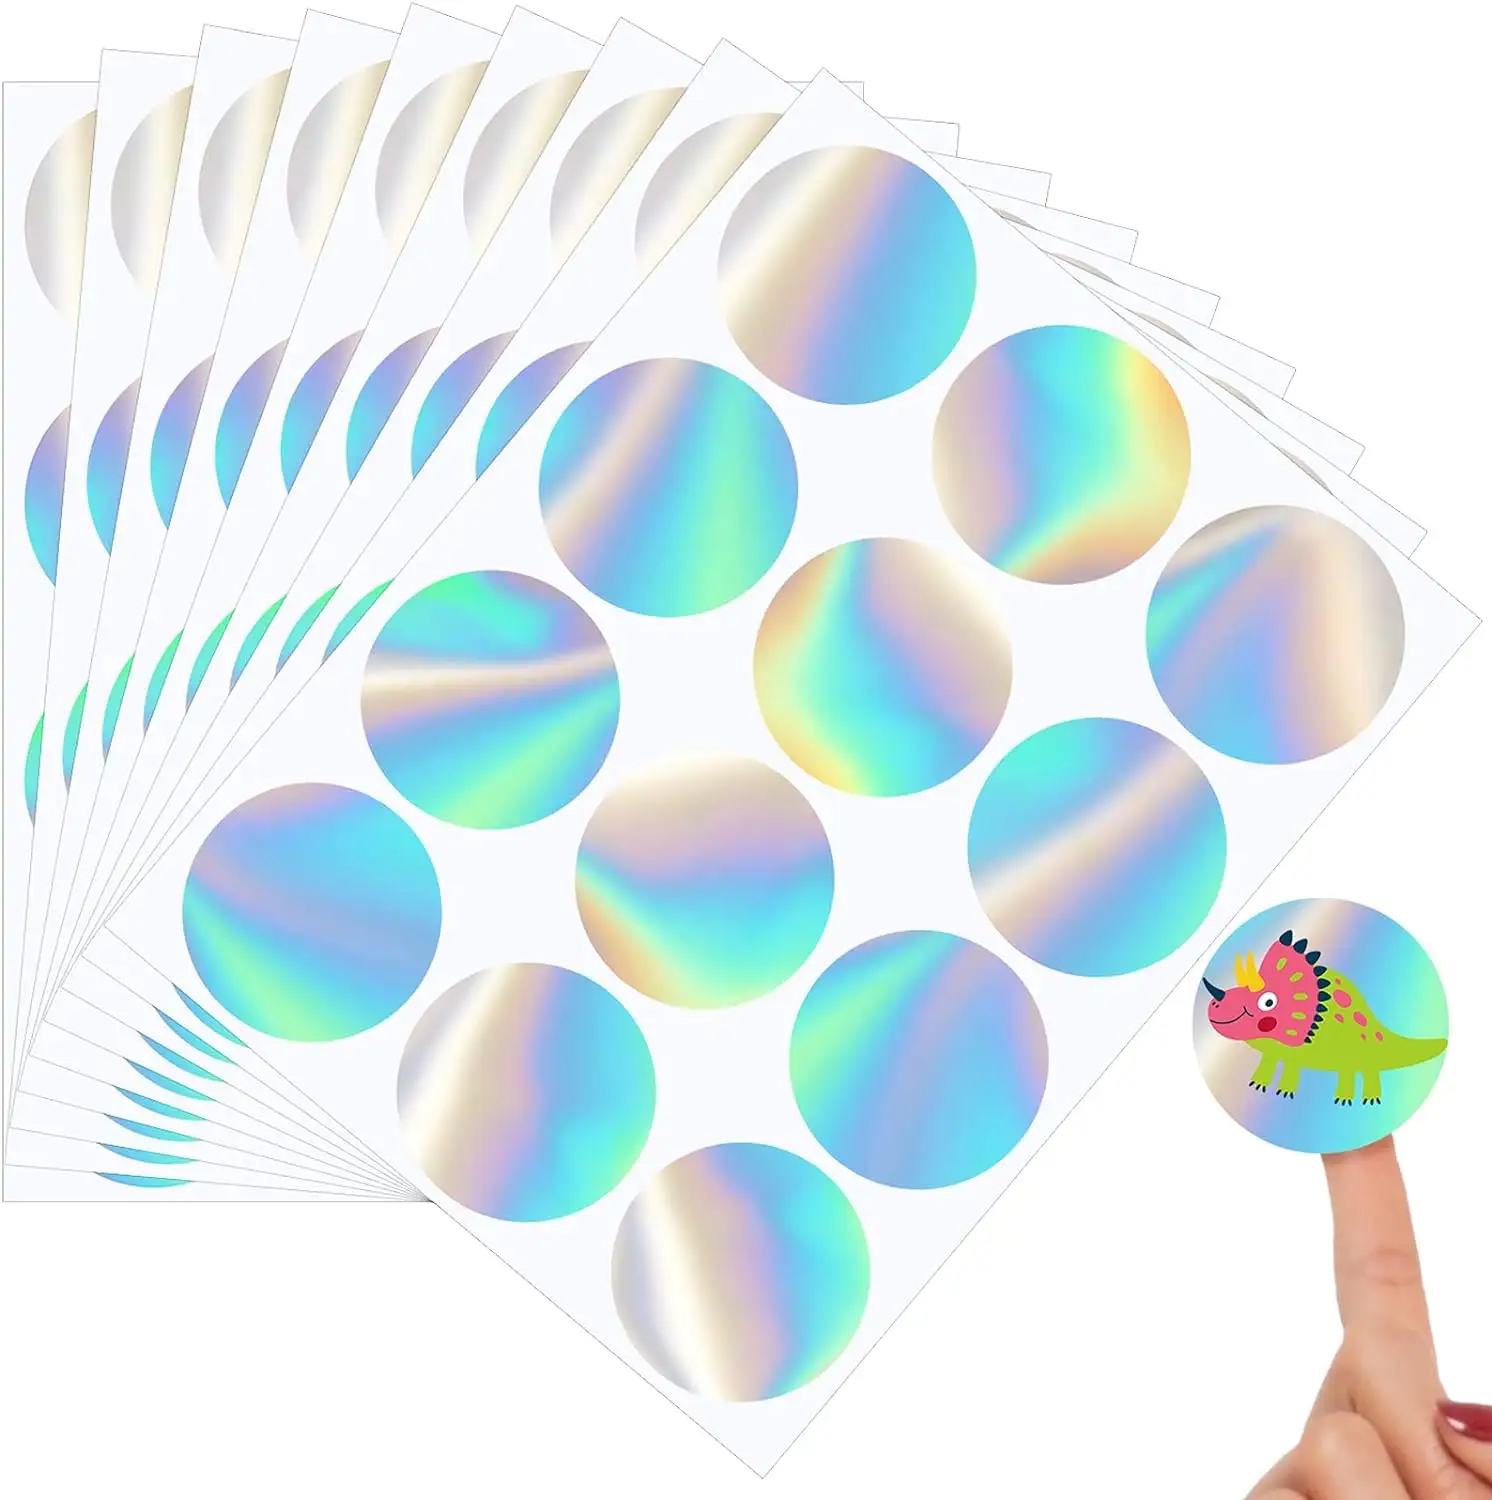 Waterproof Adhesive Holographic Round Stickers for Laser Printer Printable Vinyl Stickers Rainbow Color Coding Labels